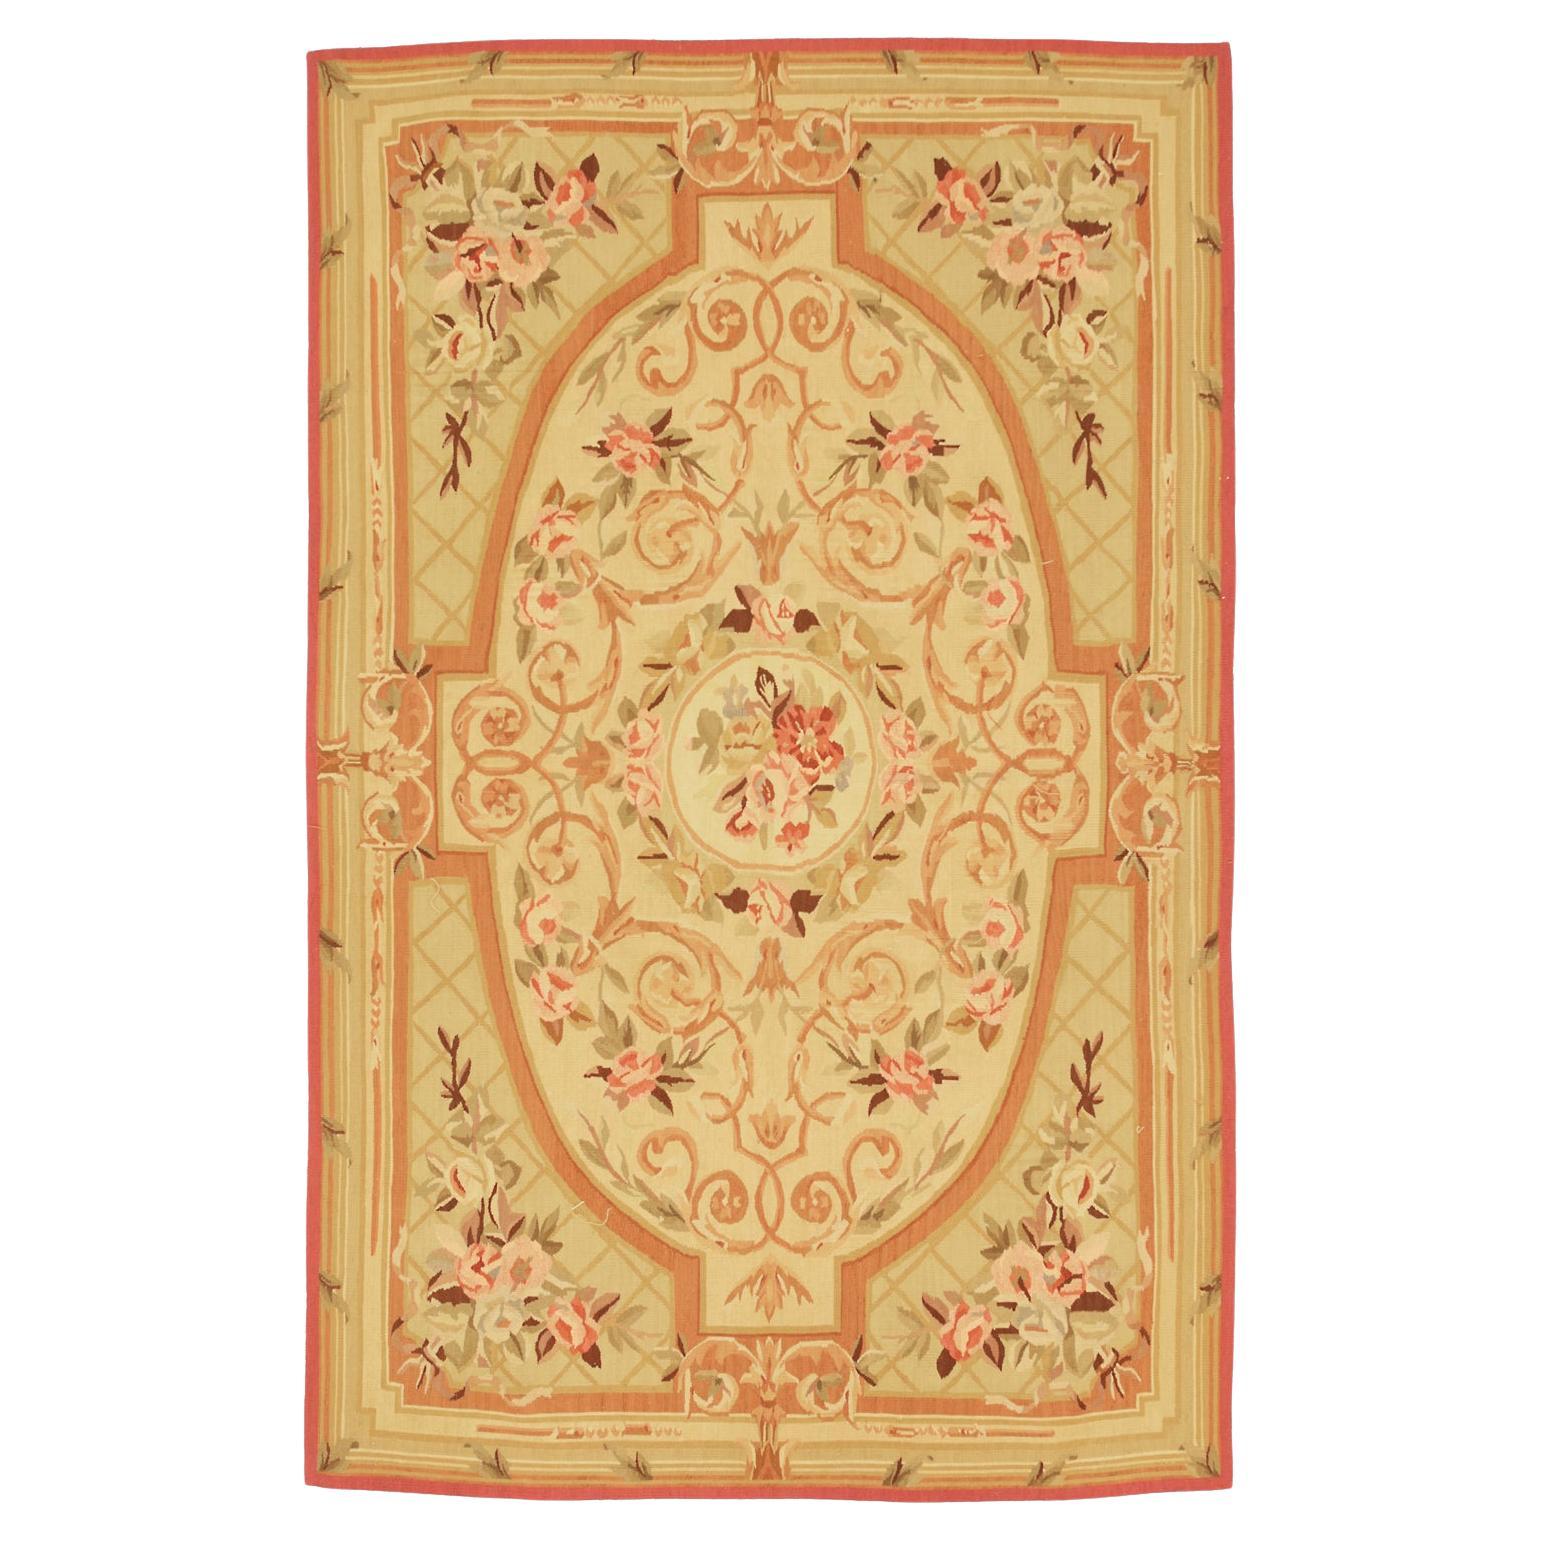 Aubusson French Style Rug Floral Design with Medallion Field, 21st Century